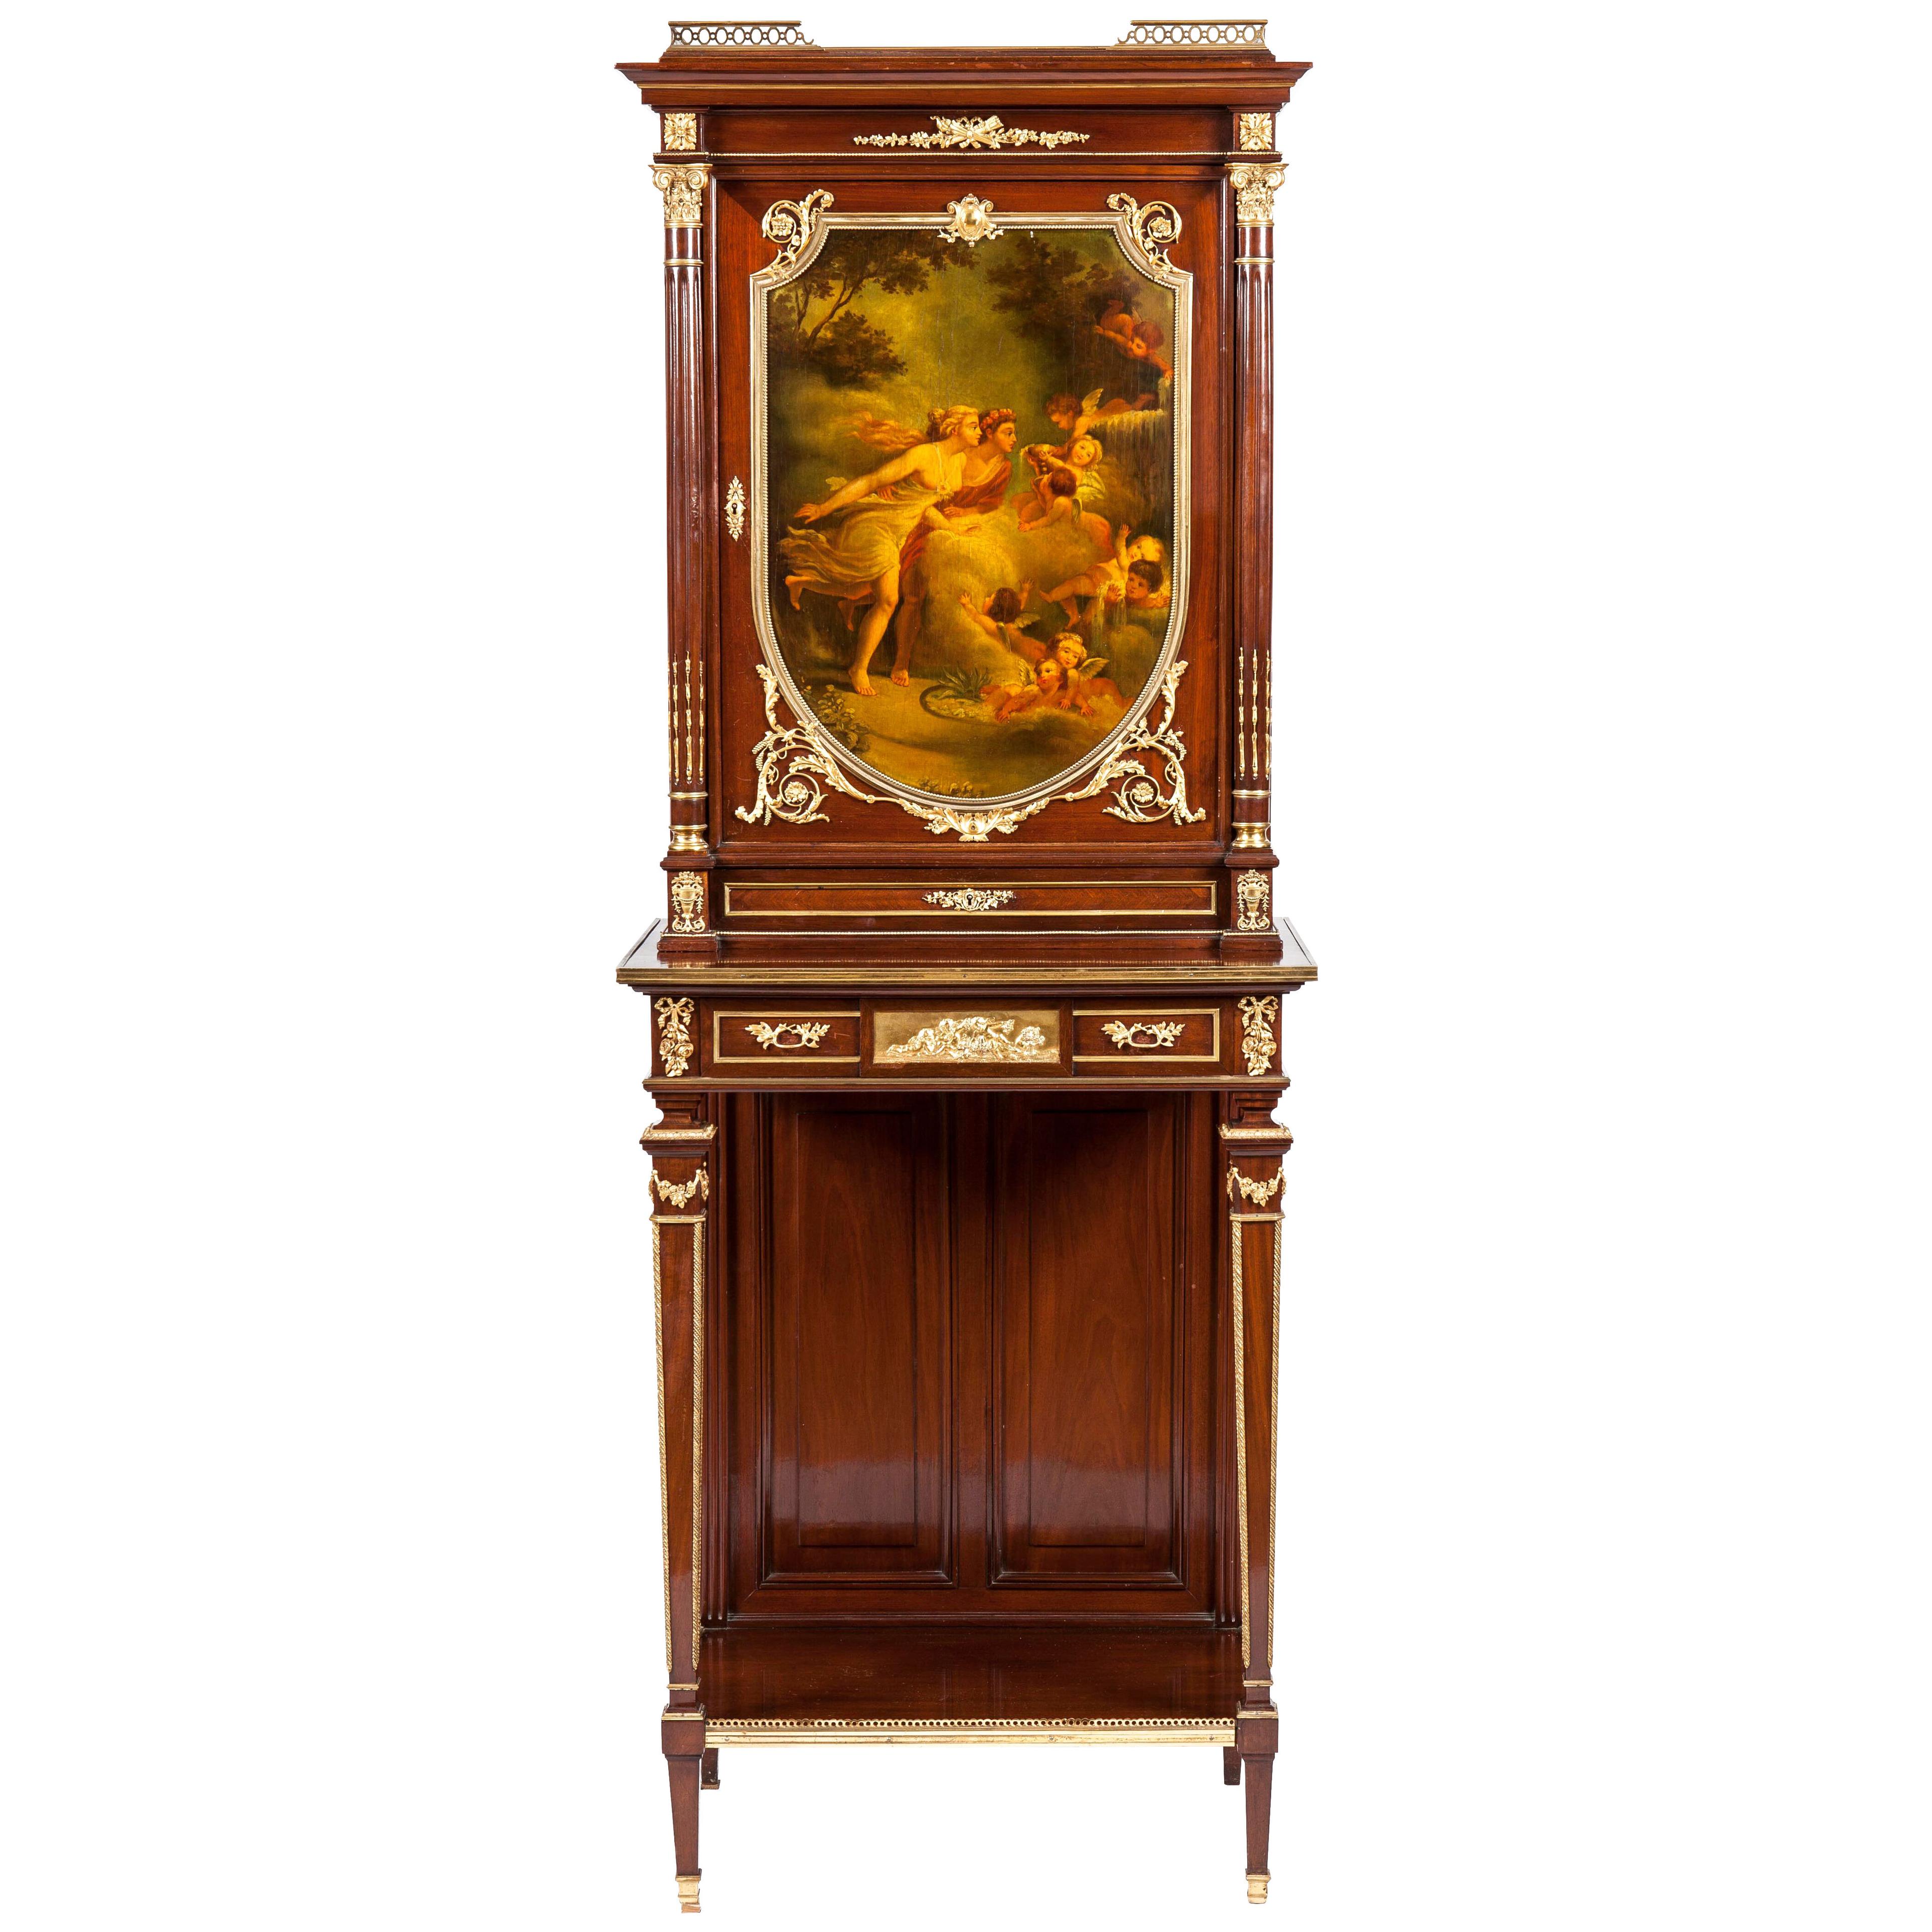 19th Century 'Vernis Martin' Painted Cabinet in the Louis XVI Style